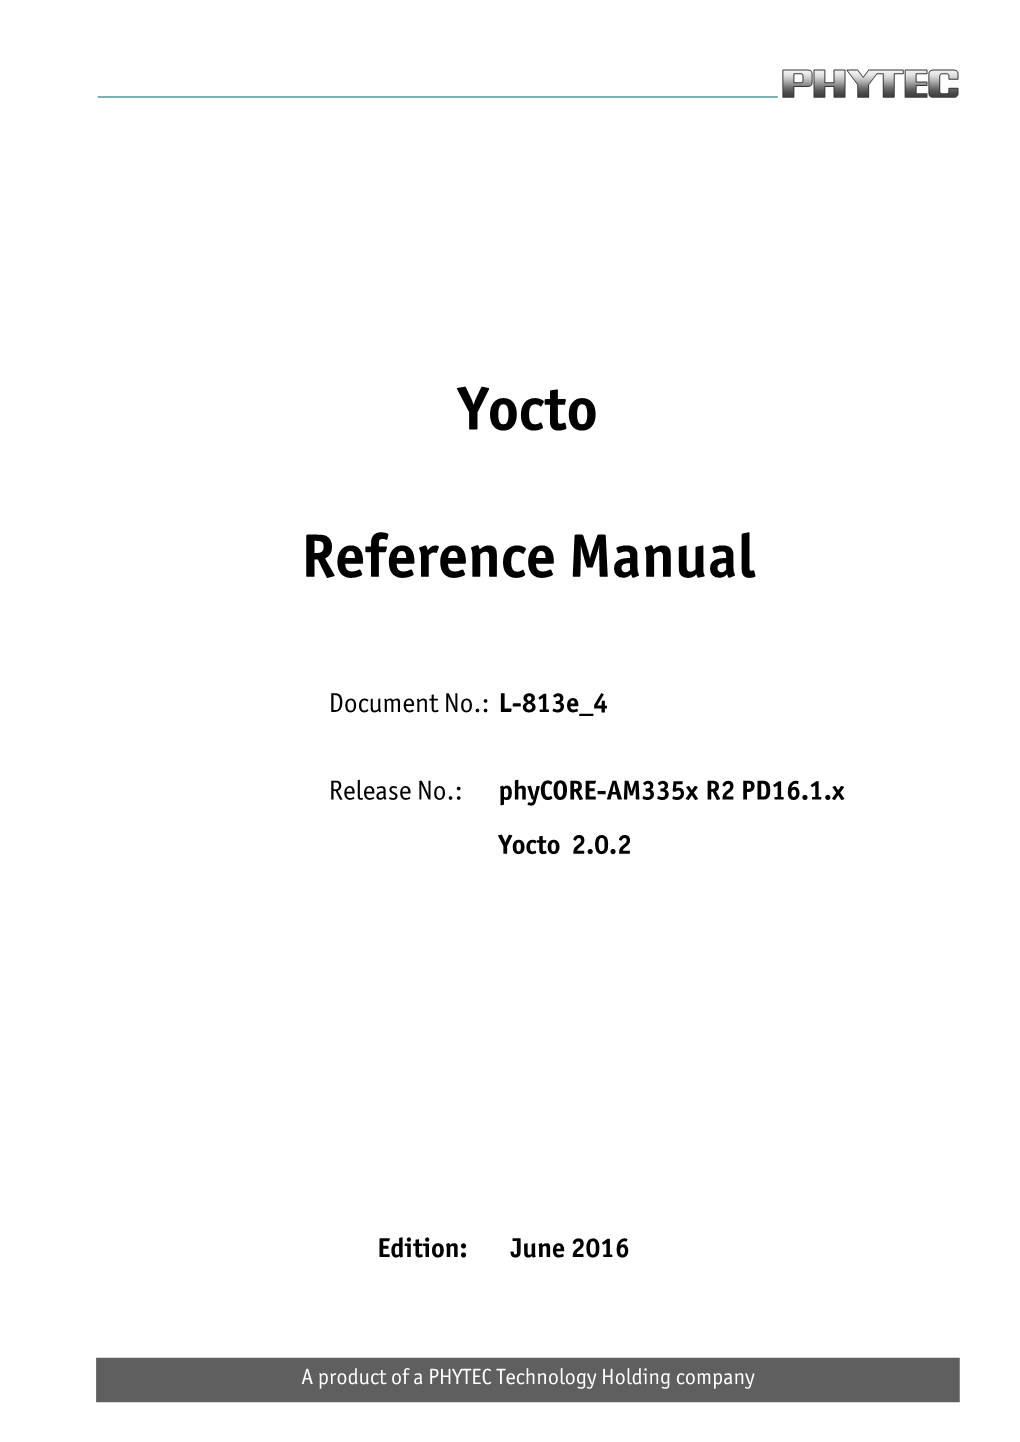 Yocto Manual Can Be Applied to the Phytec BSP As We Use the Classic Kernel Approach of Yocto and Most of the Documentation Assumes the Yocto Kernel Approach